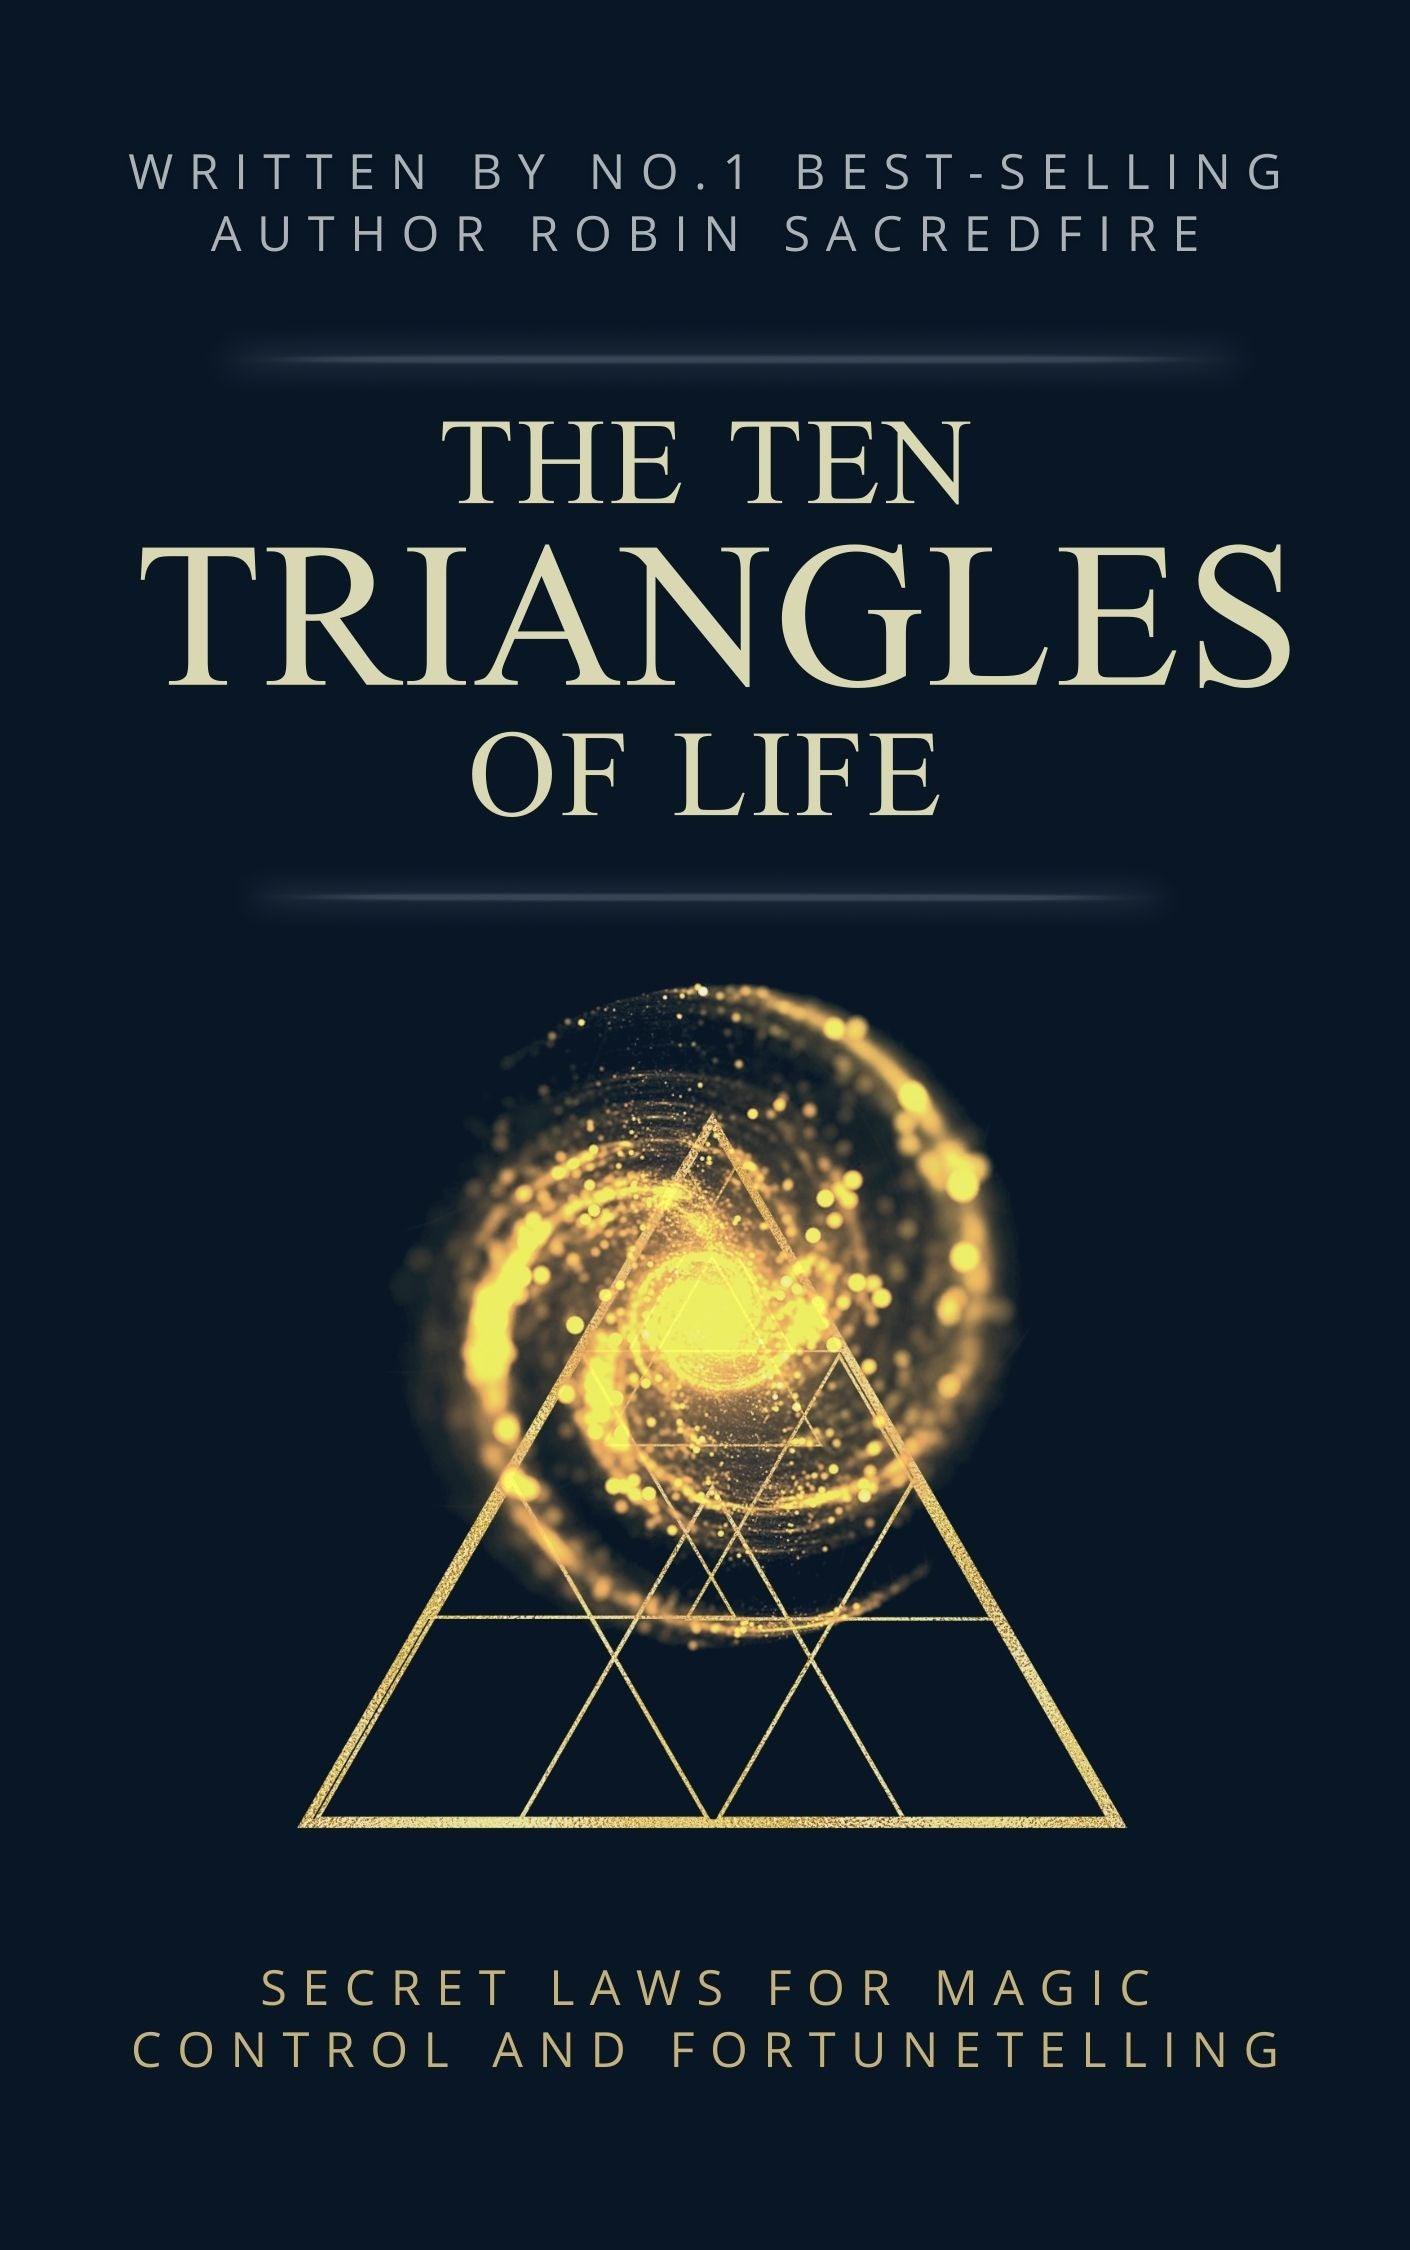 The 10 Triangles of Life English